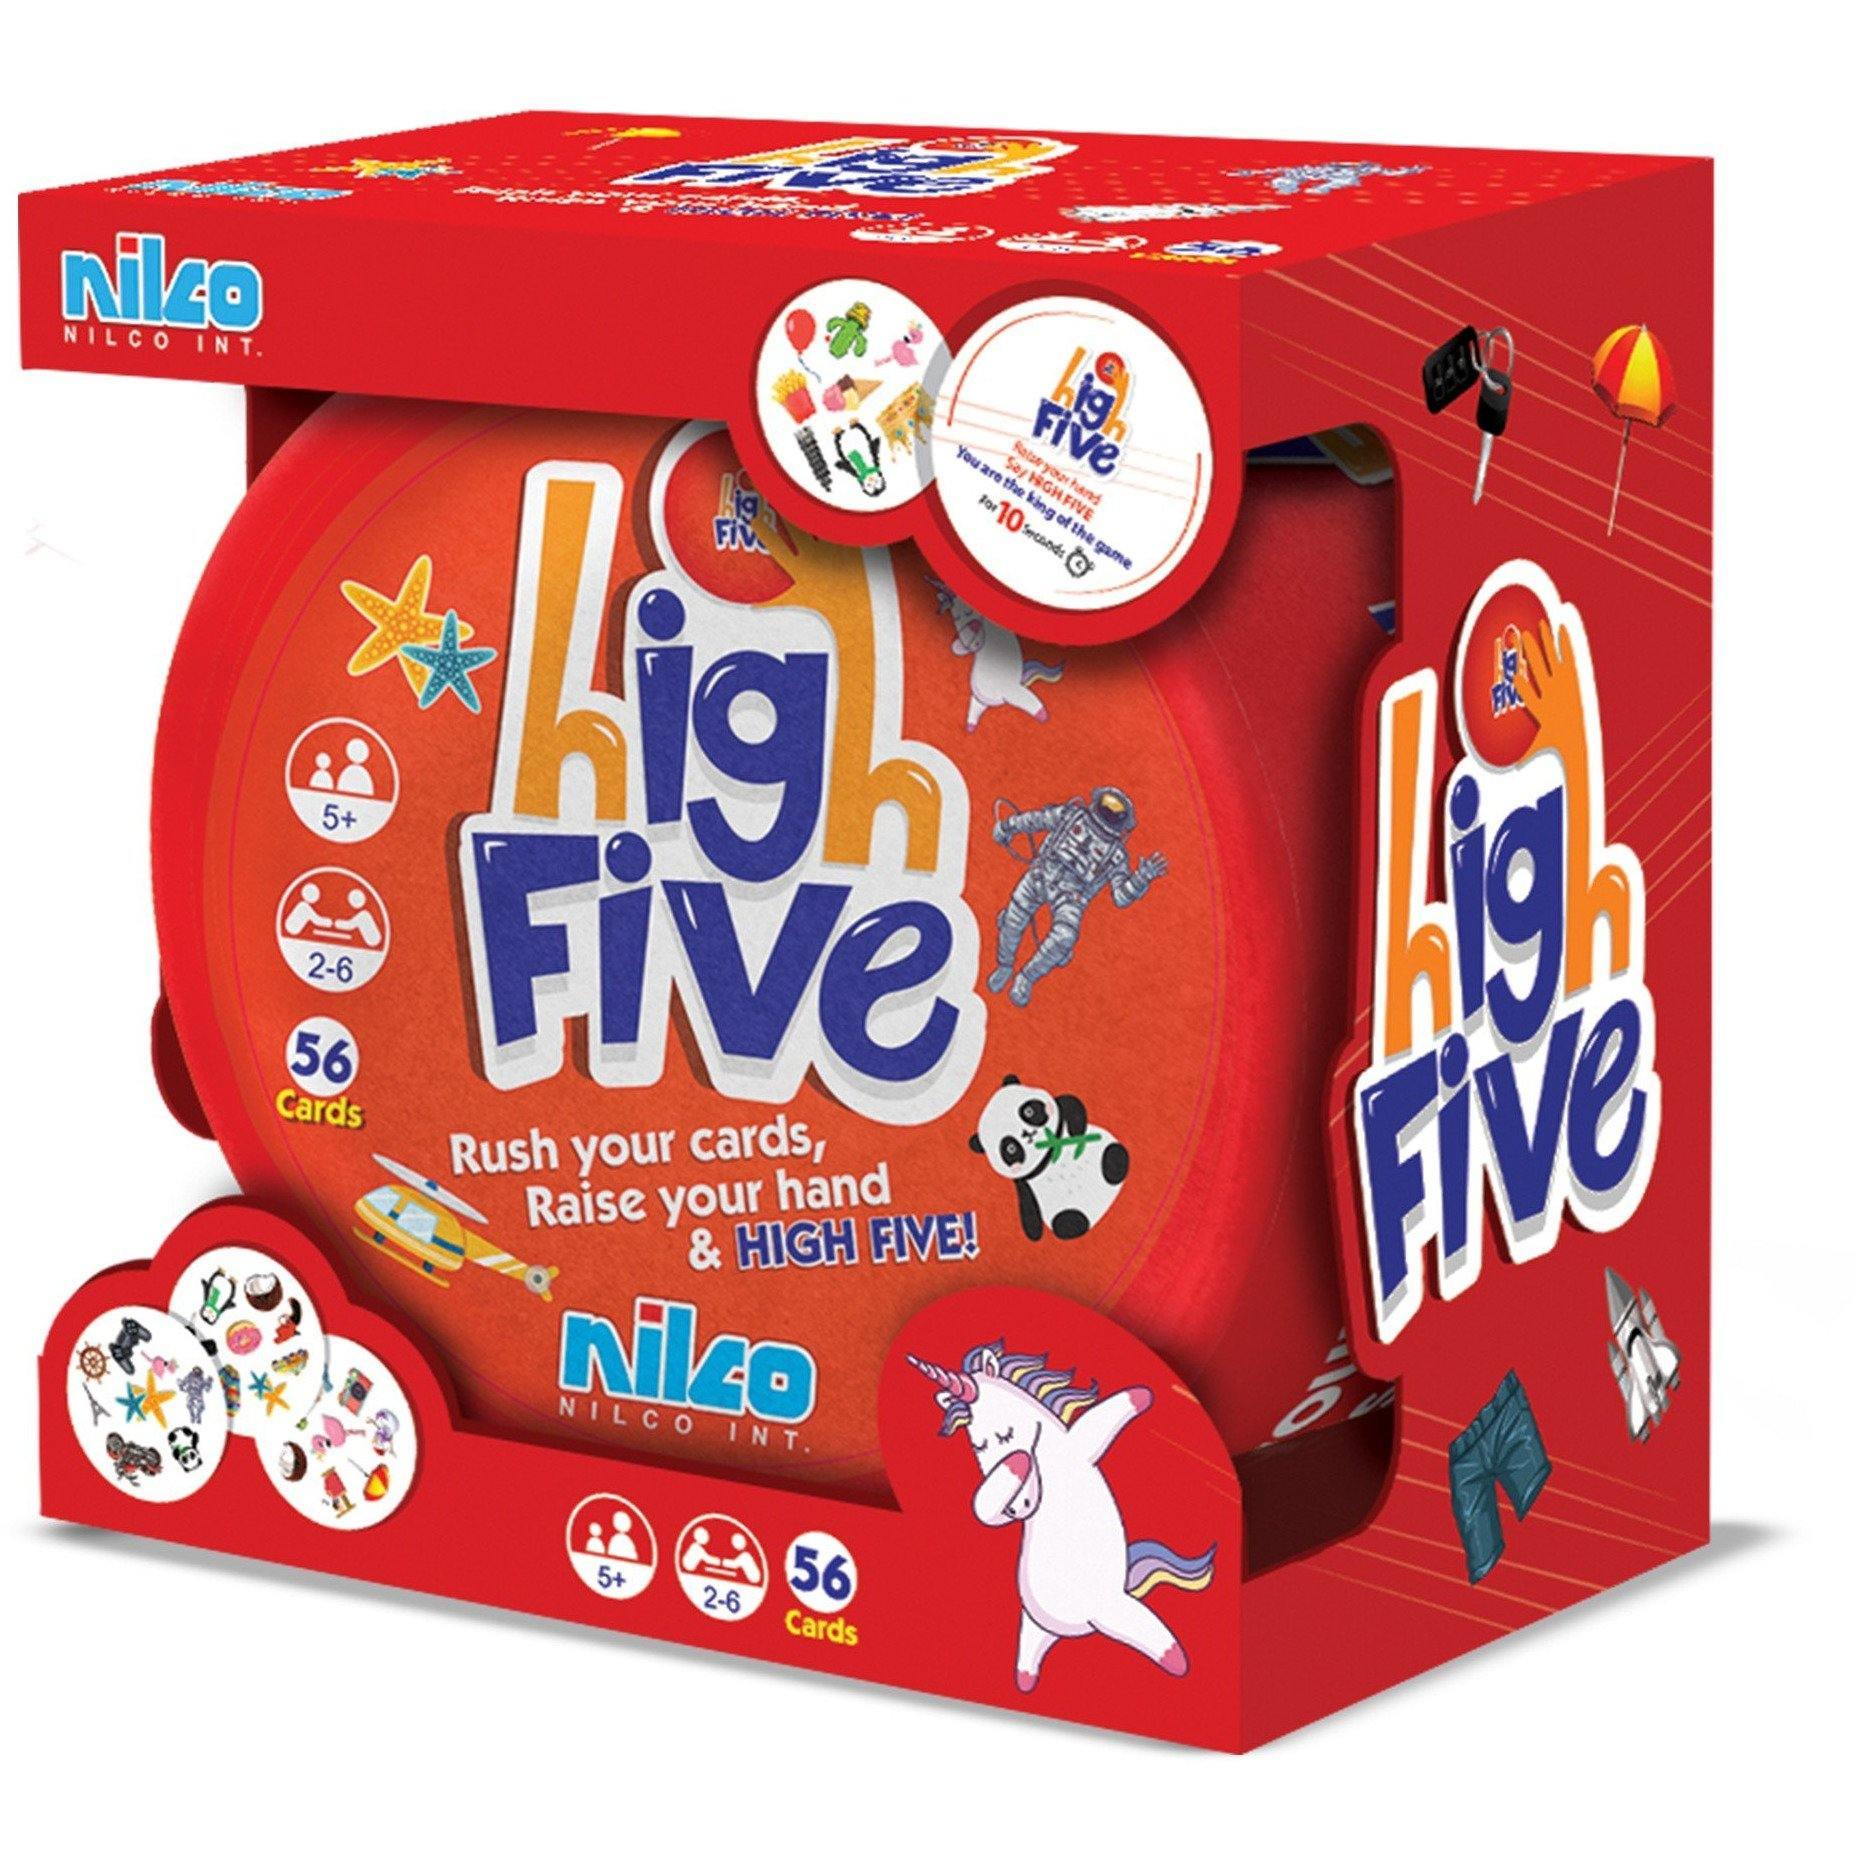 Nilco 9113 High Five Original Edition Card Game - BumbleToys - 5-7 Years, Card & Board Games, Nilco, Puzzle & Board & Card Games, Unisex